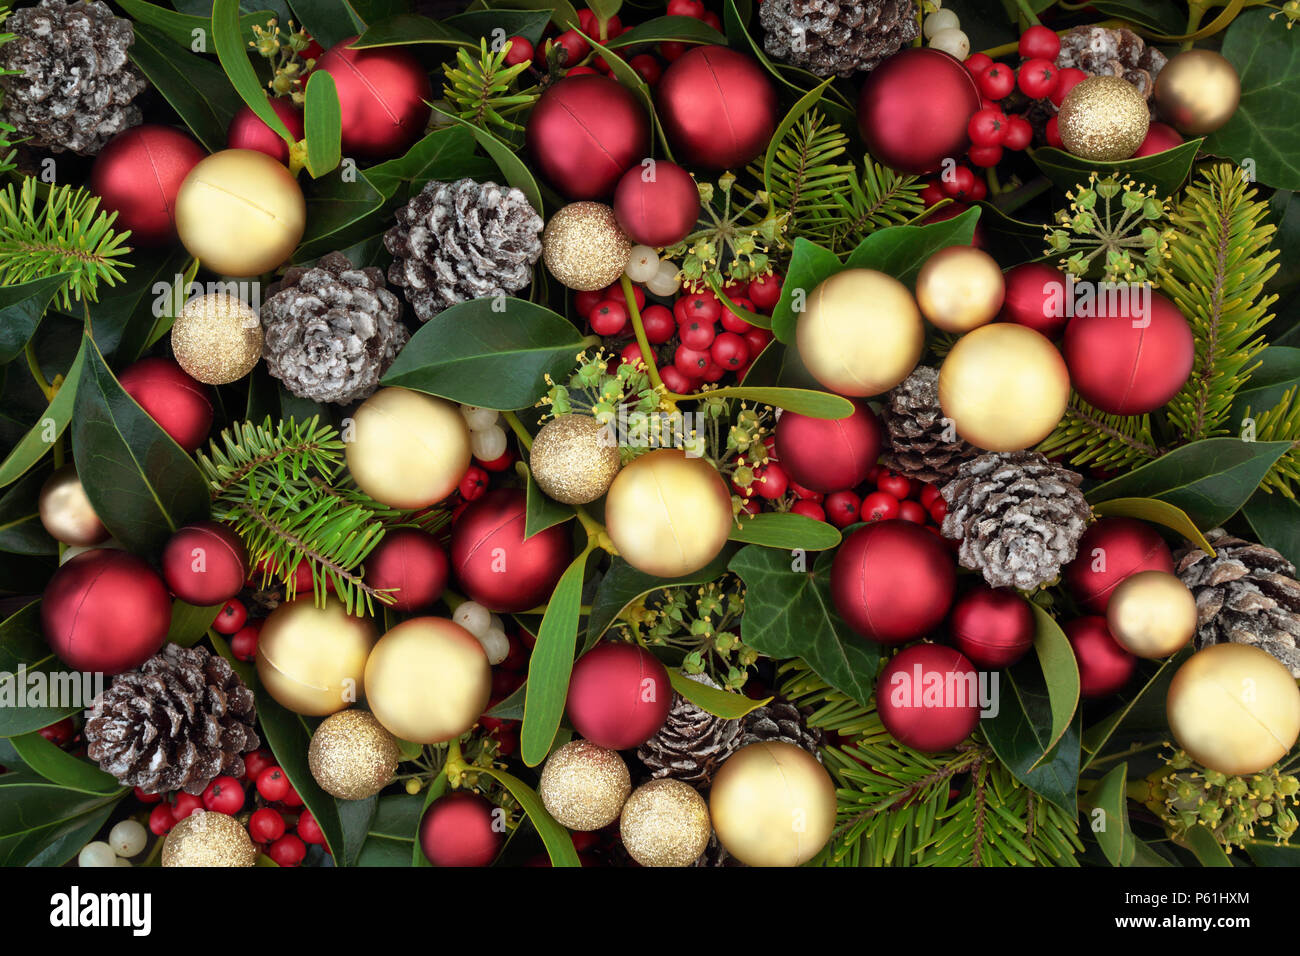 Christmas decorative background border on parchment paper with red bauble  decorations, holly, mistletoe, ivy, fir and pine cones Stock Photo - Alamy